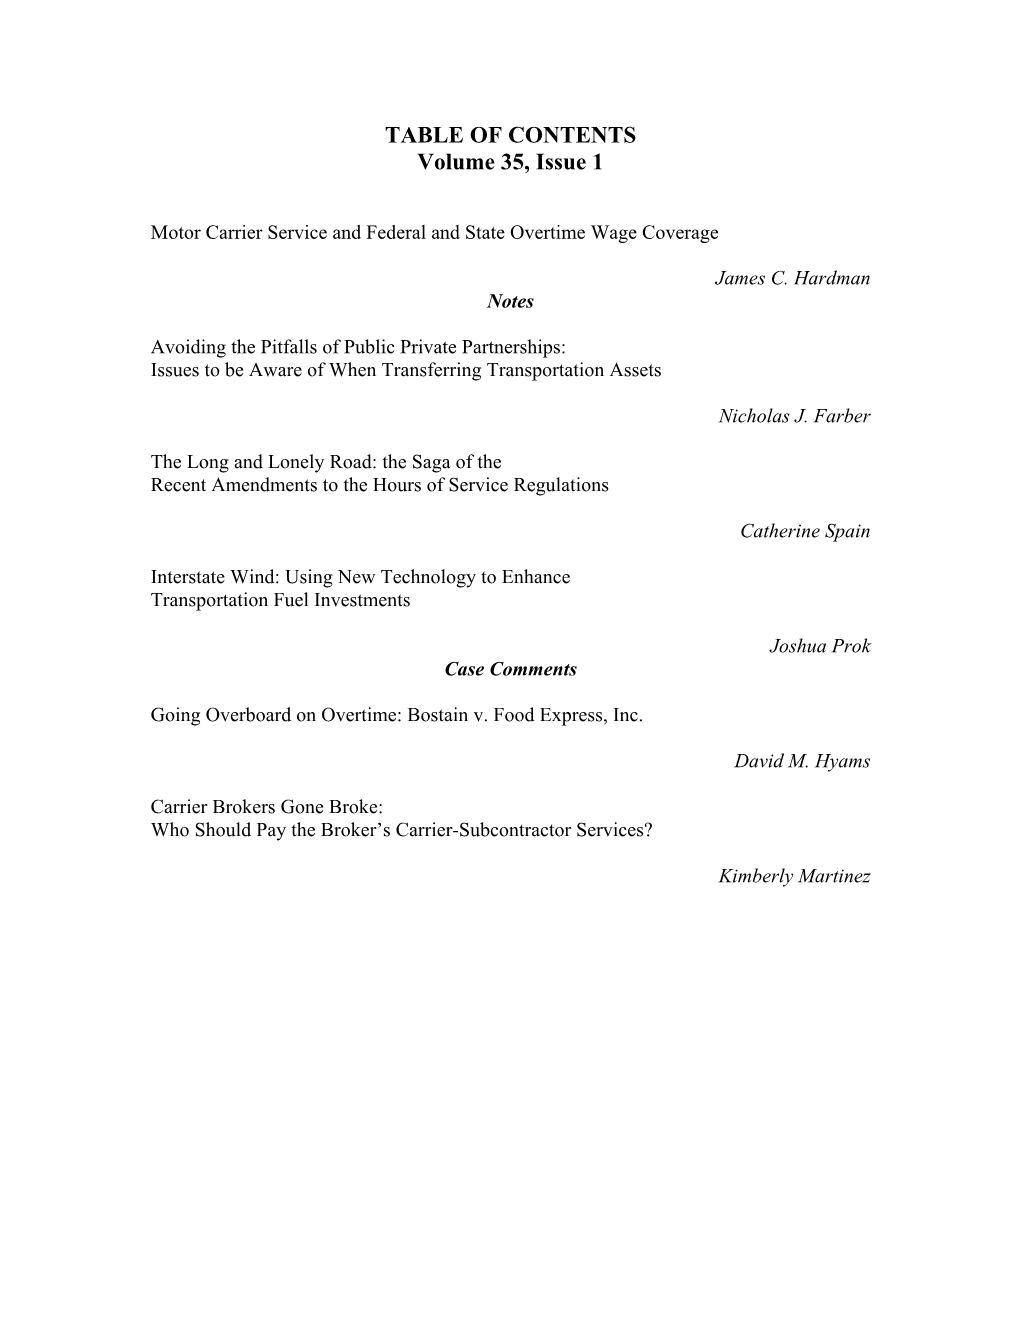 TABLE of CONTENTS Volume 35, Issue 1